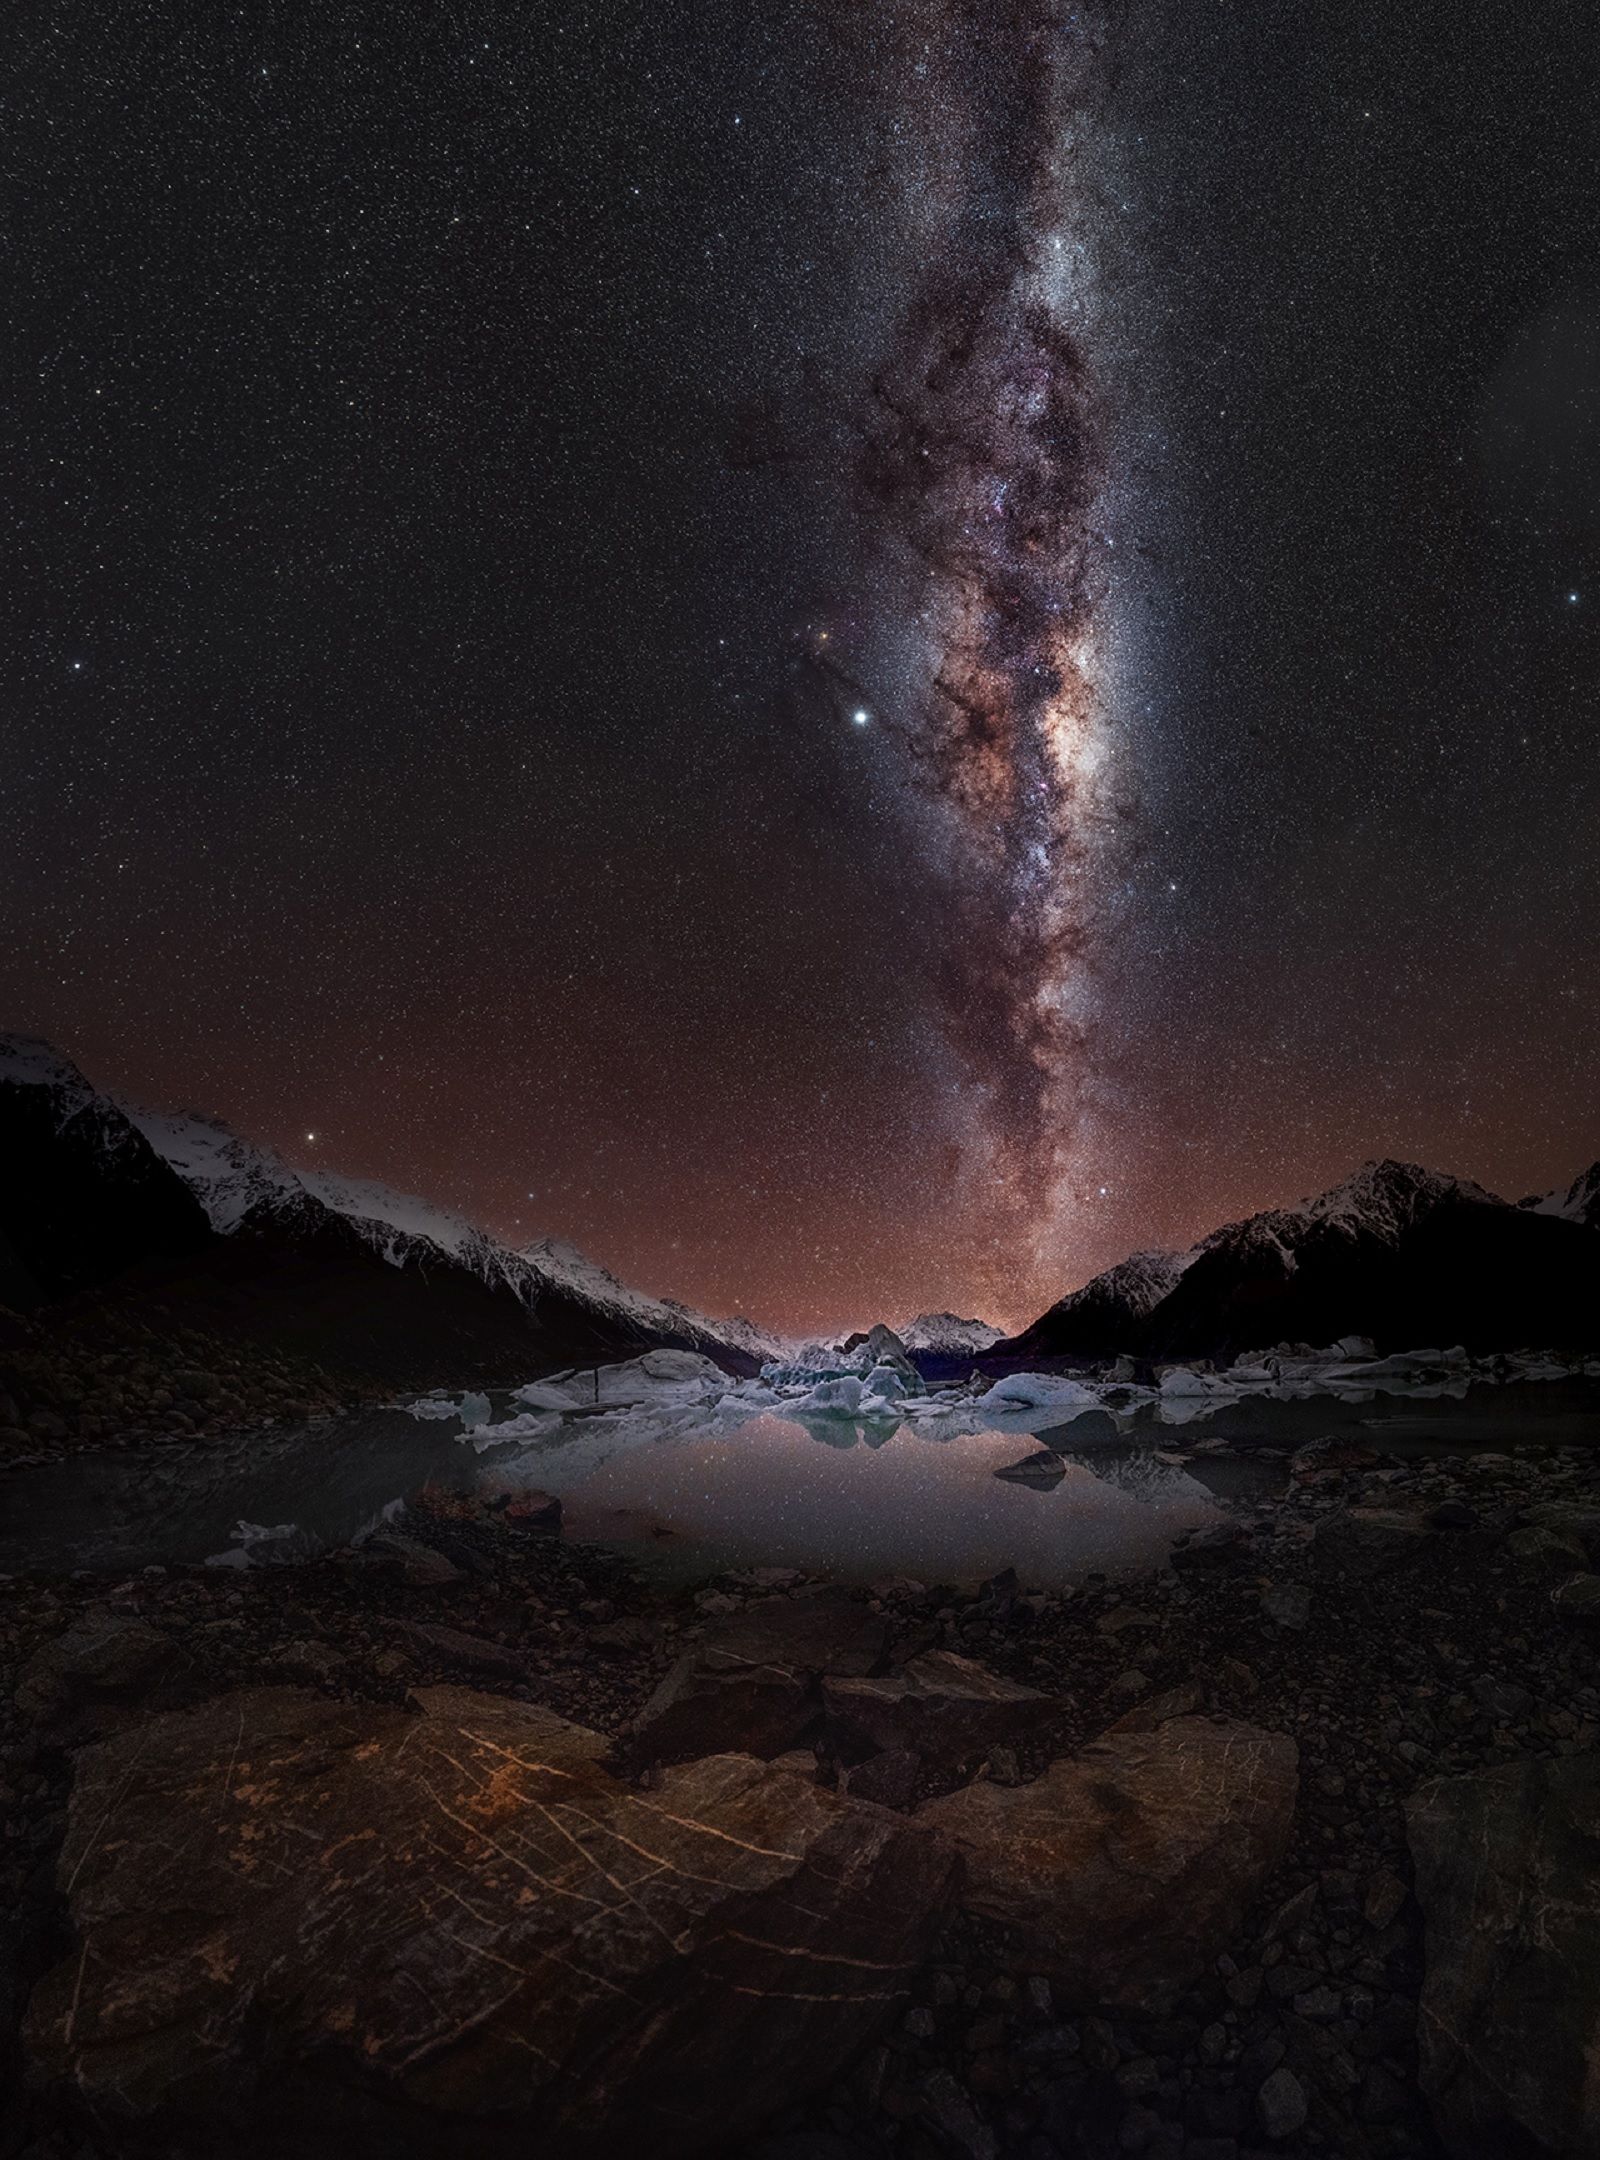 Check out these stunning photos from the 2020 Astronomy Photographer of the Year award photo 23